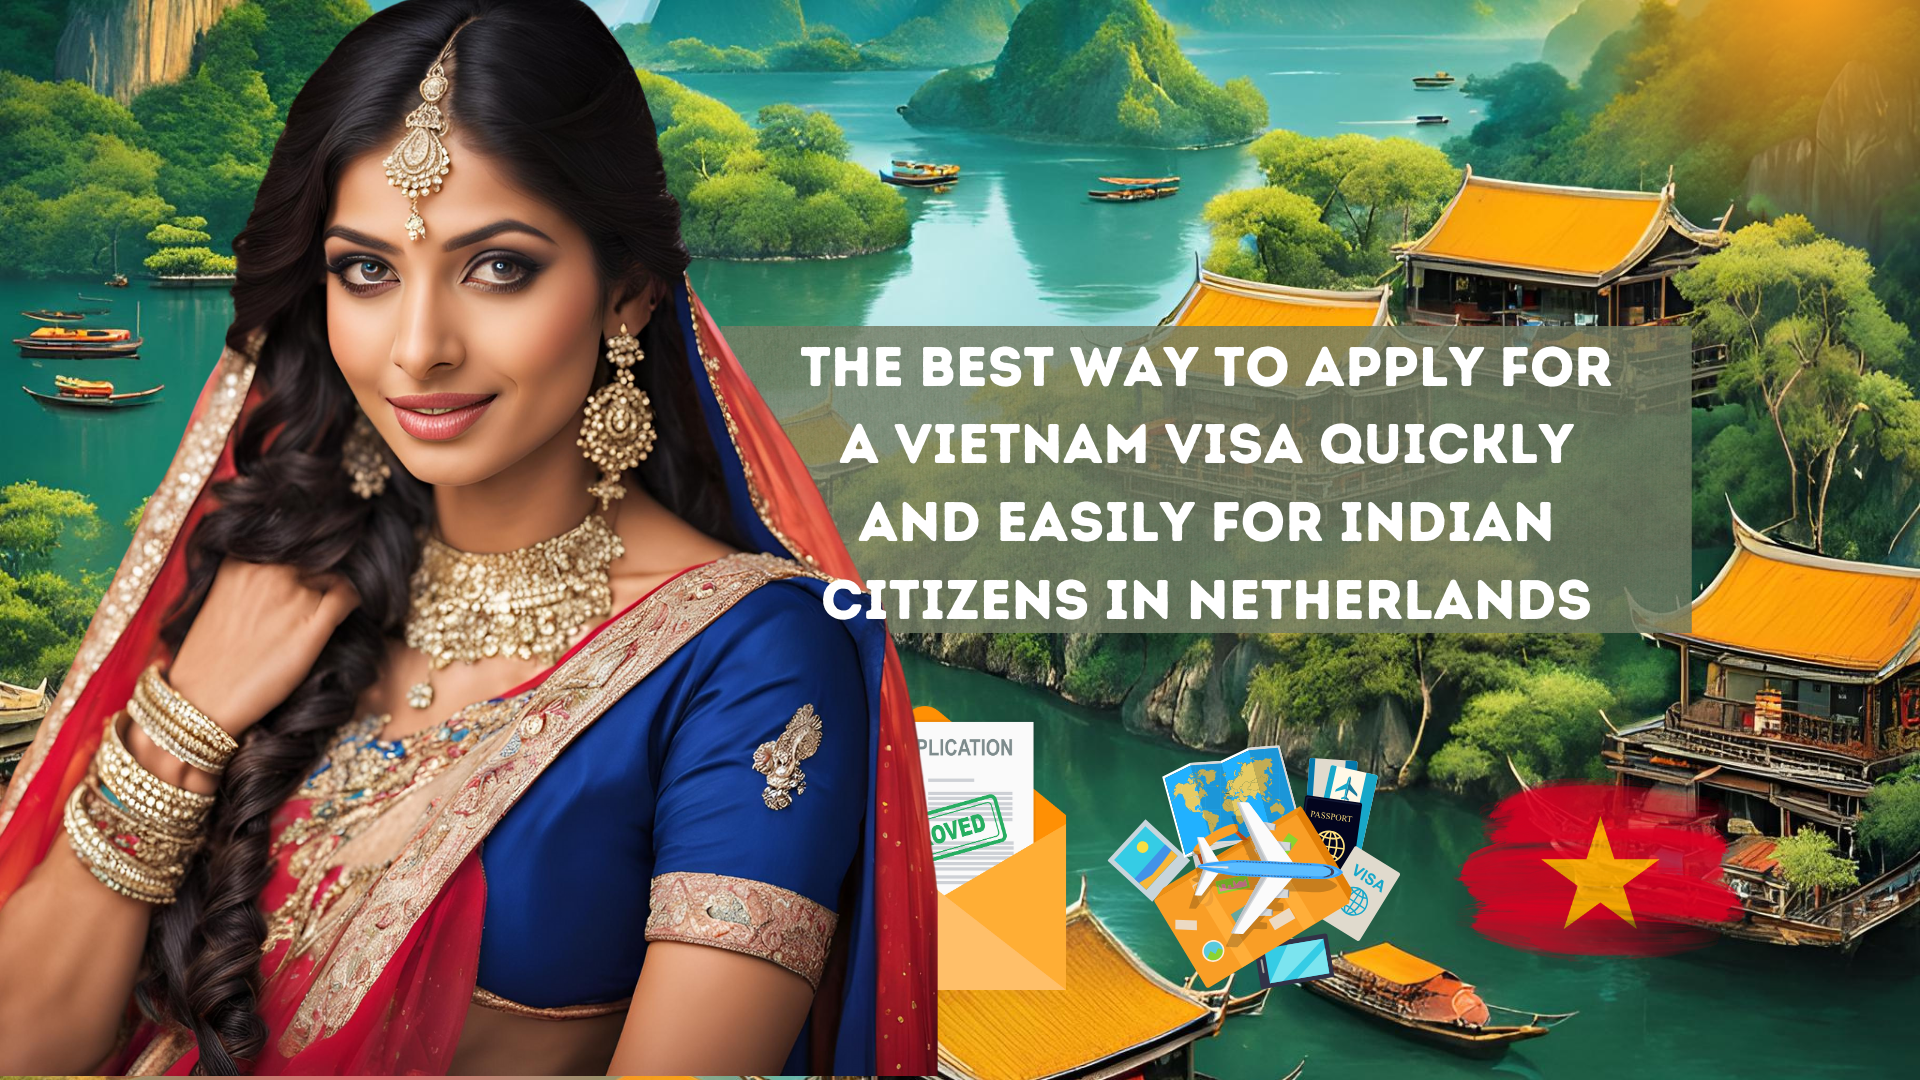 The best way to apply for a Vietnam visa quickly and easily for Indian citizens in Netherlands